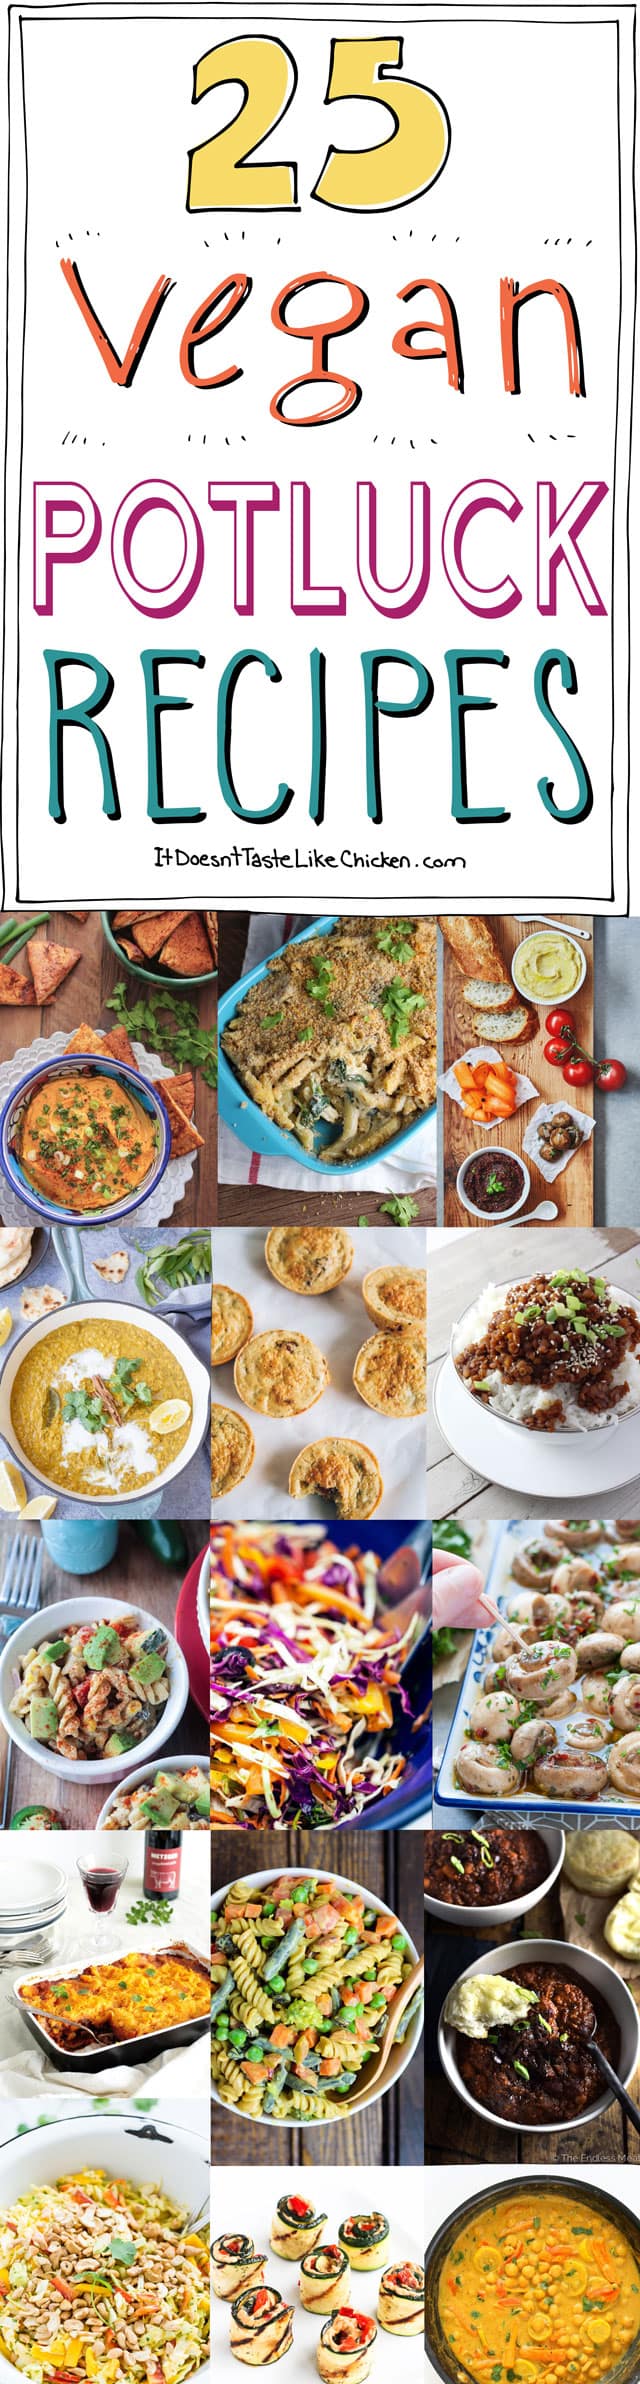 25 Vegan Potluck Recipes! So delicious everyone will enjoy. Everything from appetizers, sides, main dishes, to desserts. #itdoesnttastelikechicken